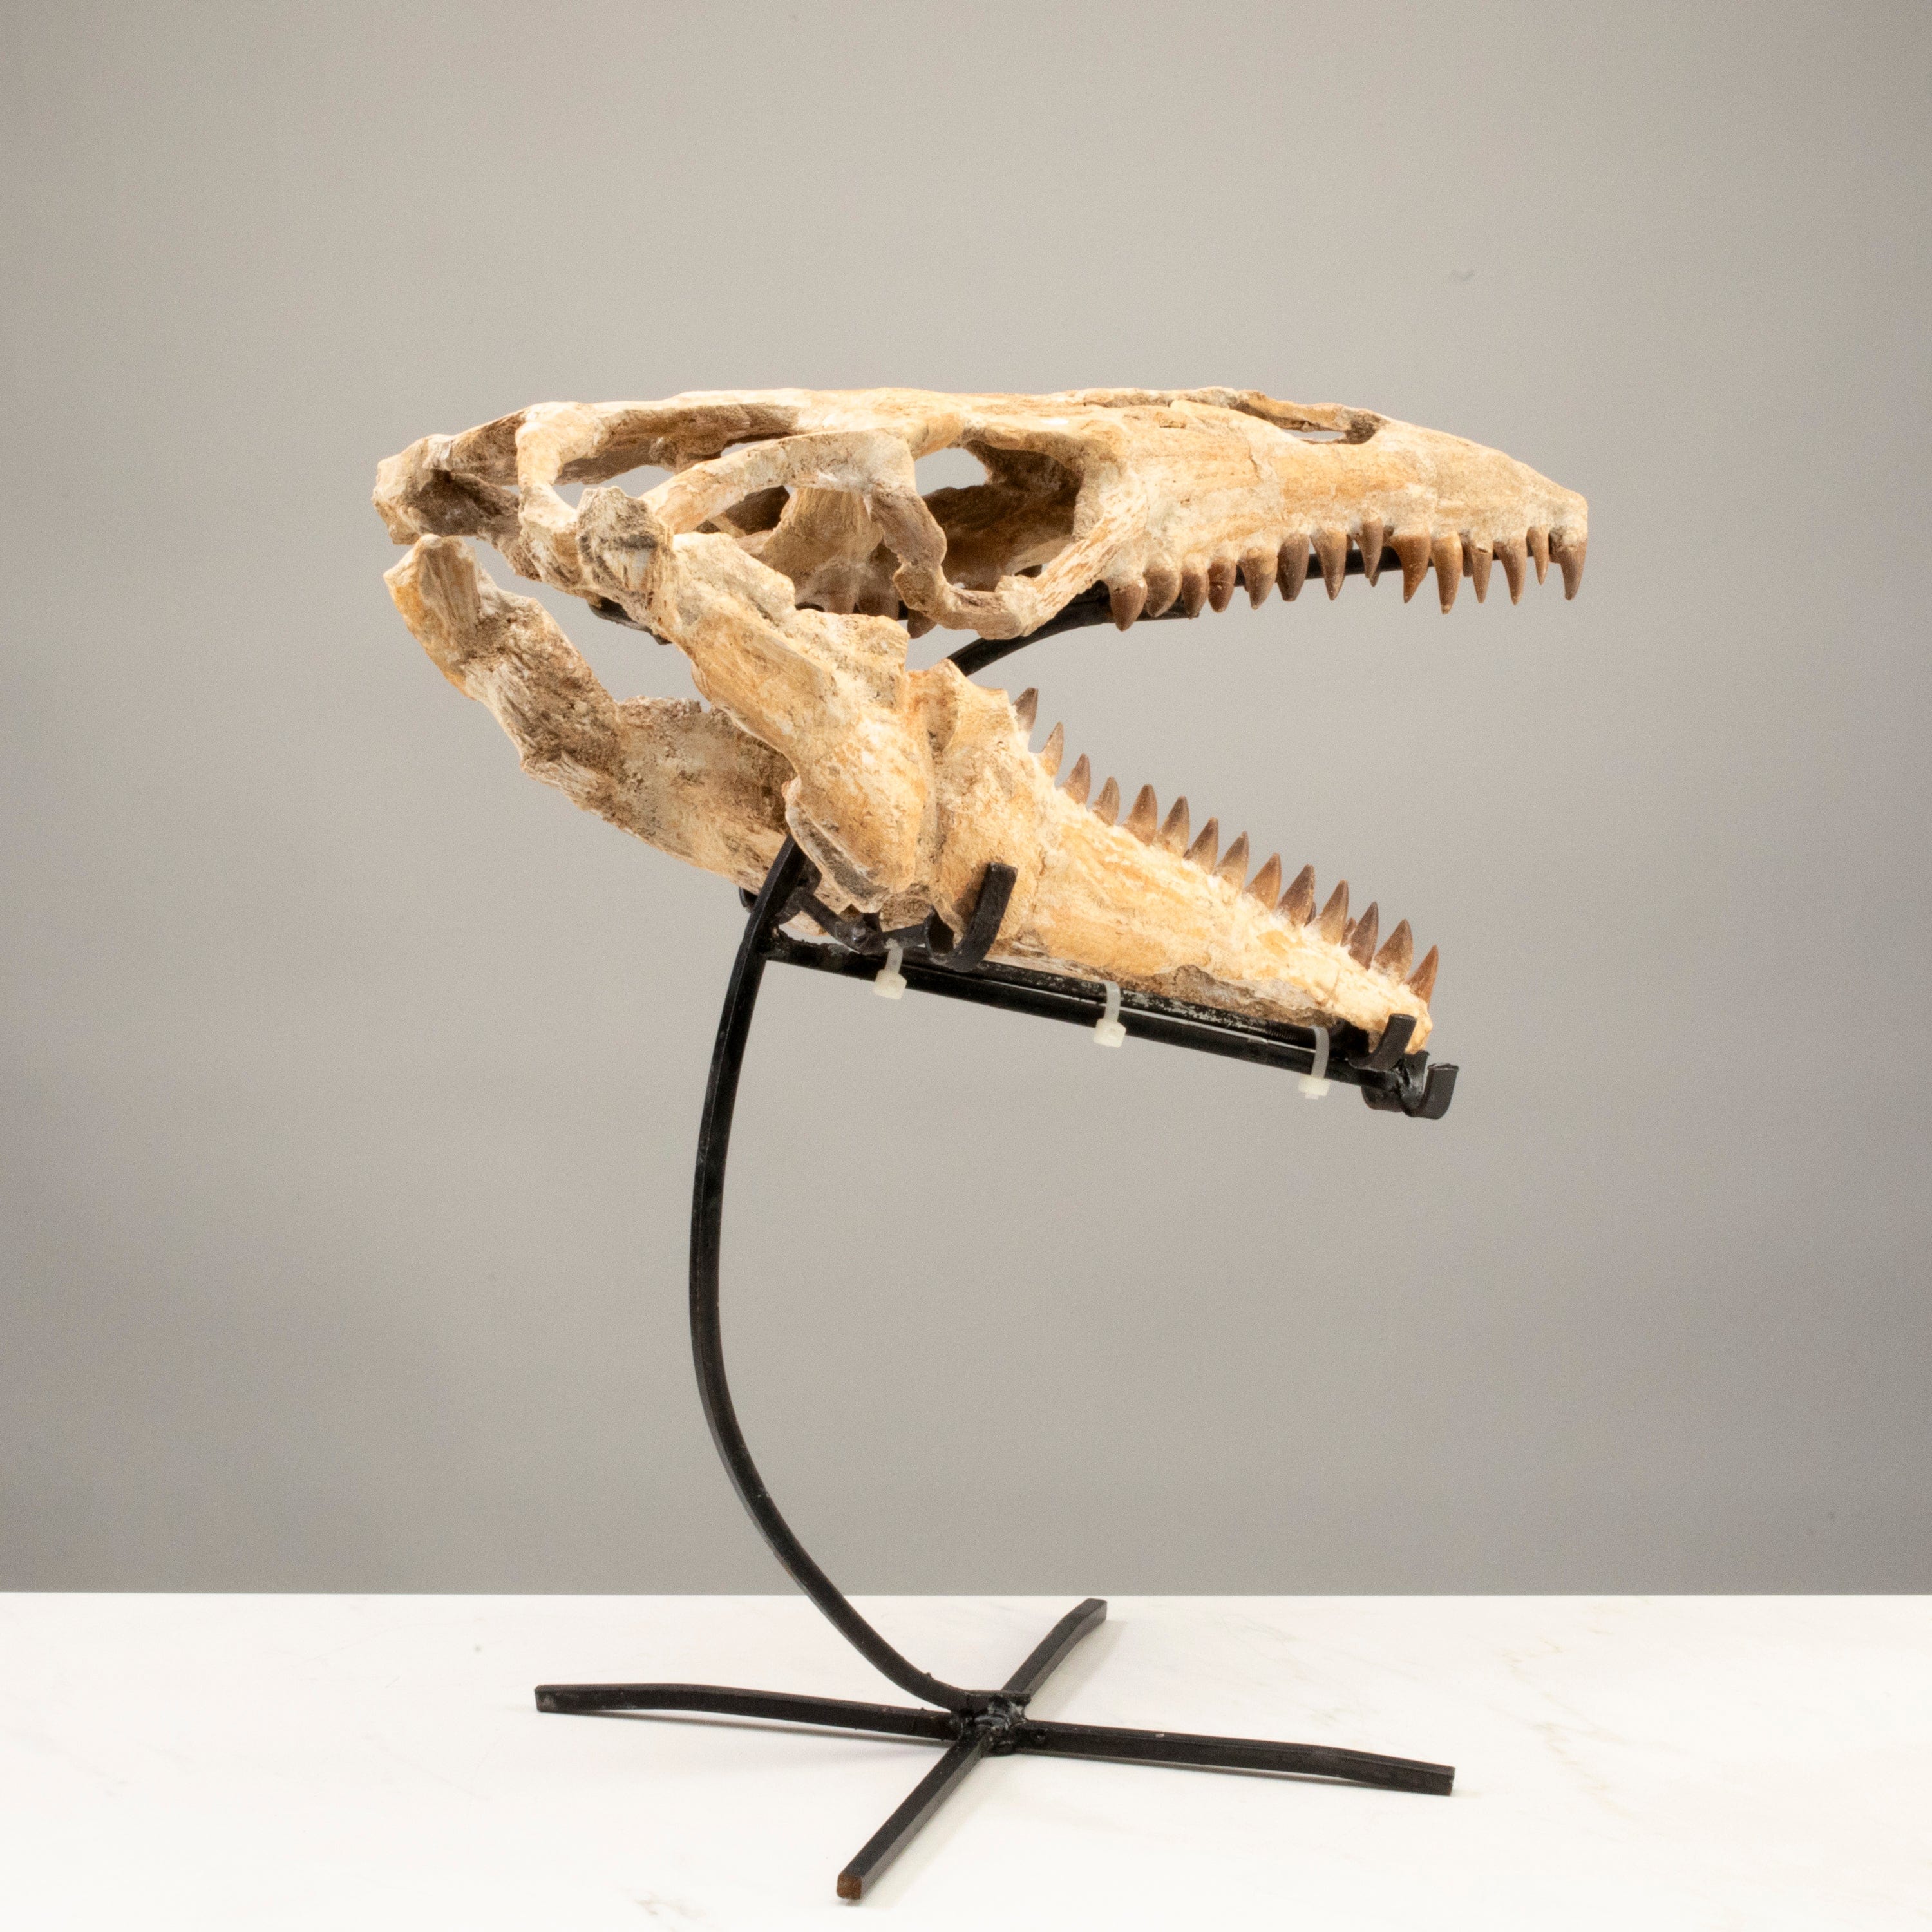 Kalifano Mosasaurus Fossils Moroccan Mosasaurus Jaw Fossil  on Custom Stand - 17" MOST30000.001